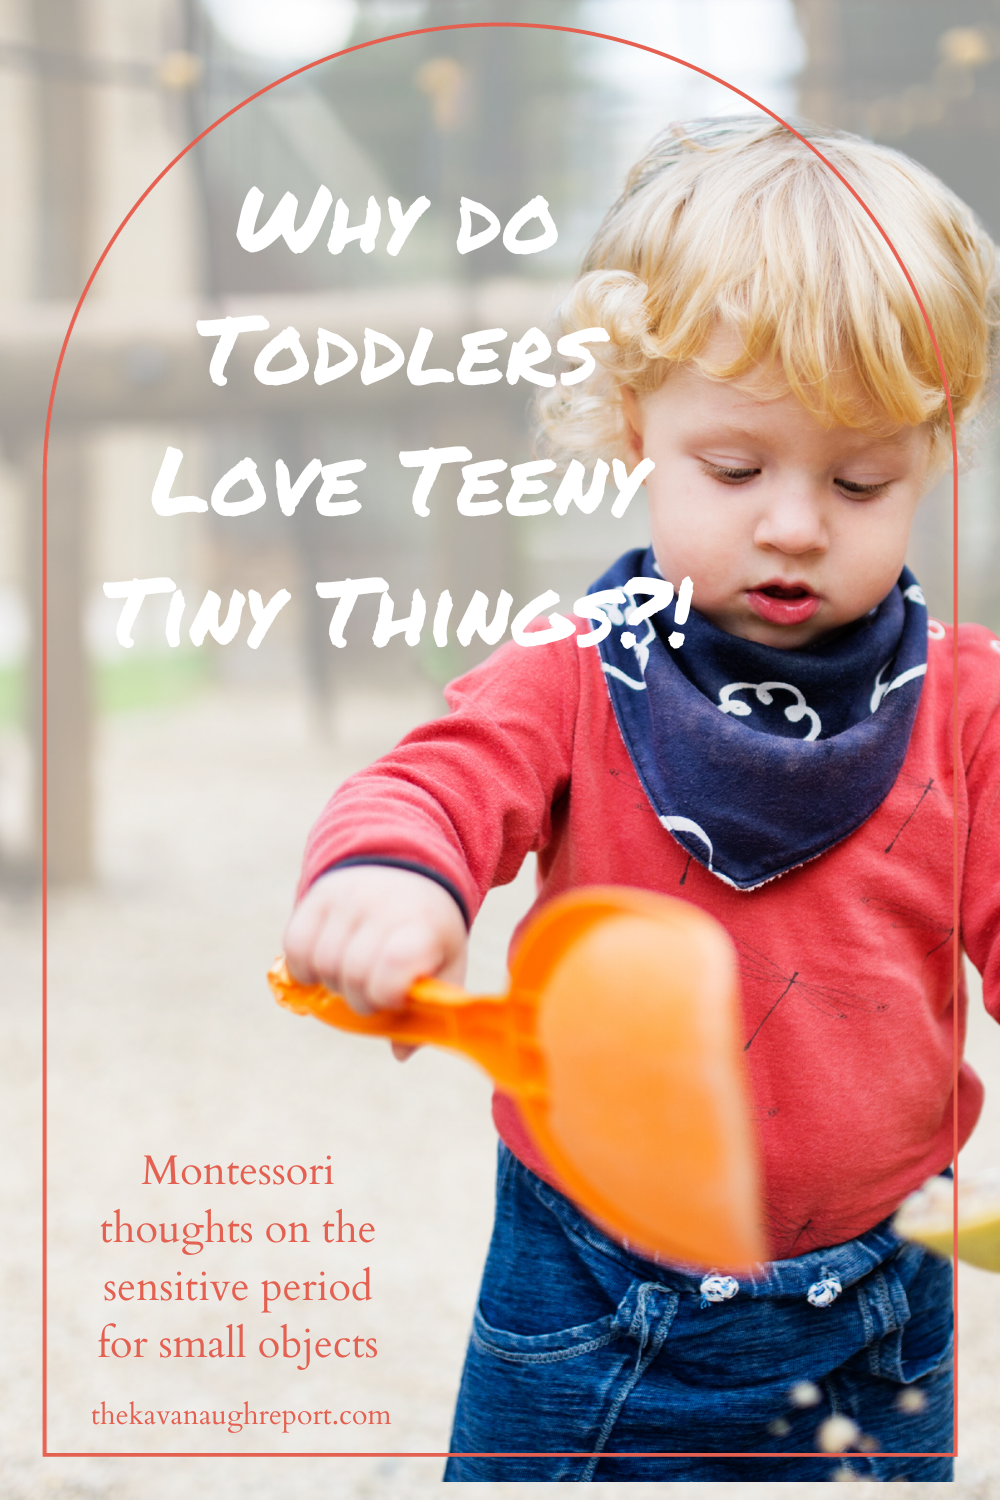 Ever wondered what's the deal with toddlers being fascinated with tiny objects? It's a part of their developmental stage! Explore how you can make the most of this sensitive period by allowing your little ones to explore safely.